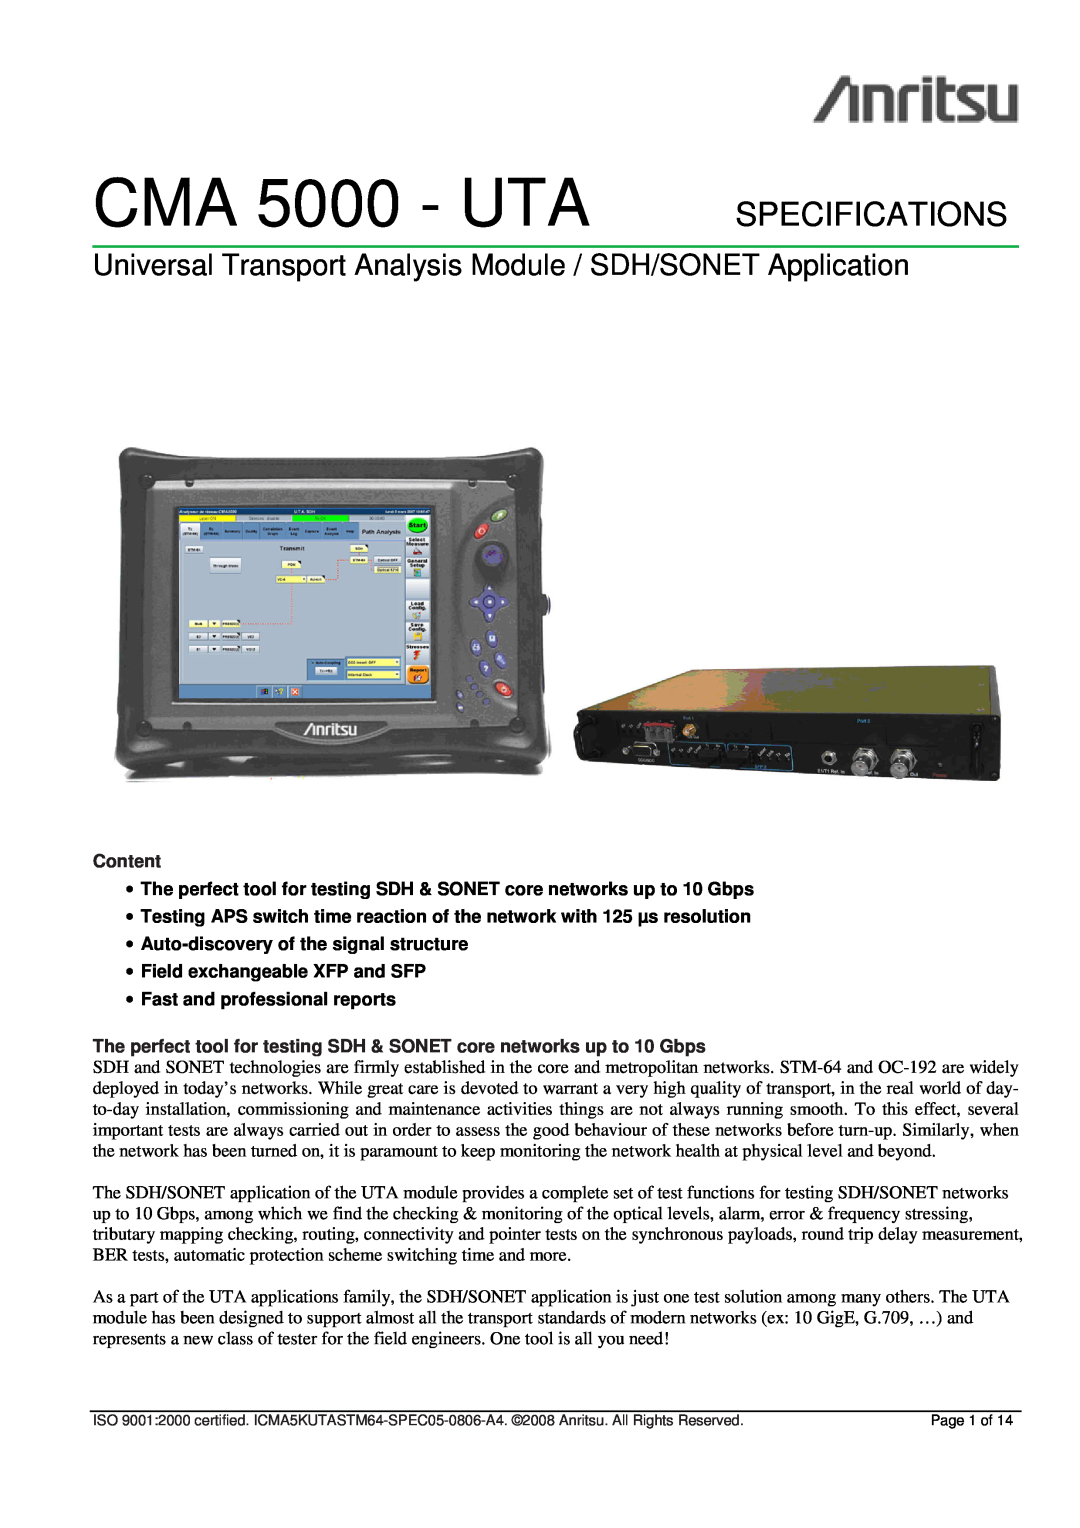 Anritsu CMA 5000 - UTA specifications Content, Auto-discoveryof the signal structure, Field exchangeable XFP and SFP 